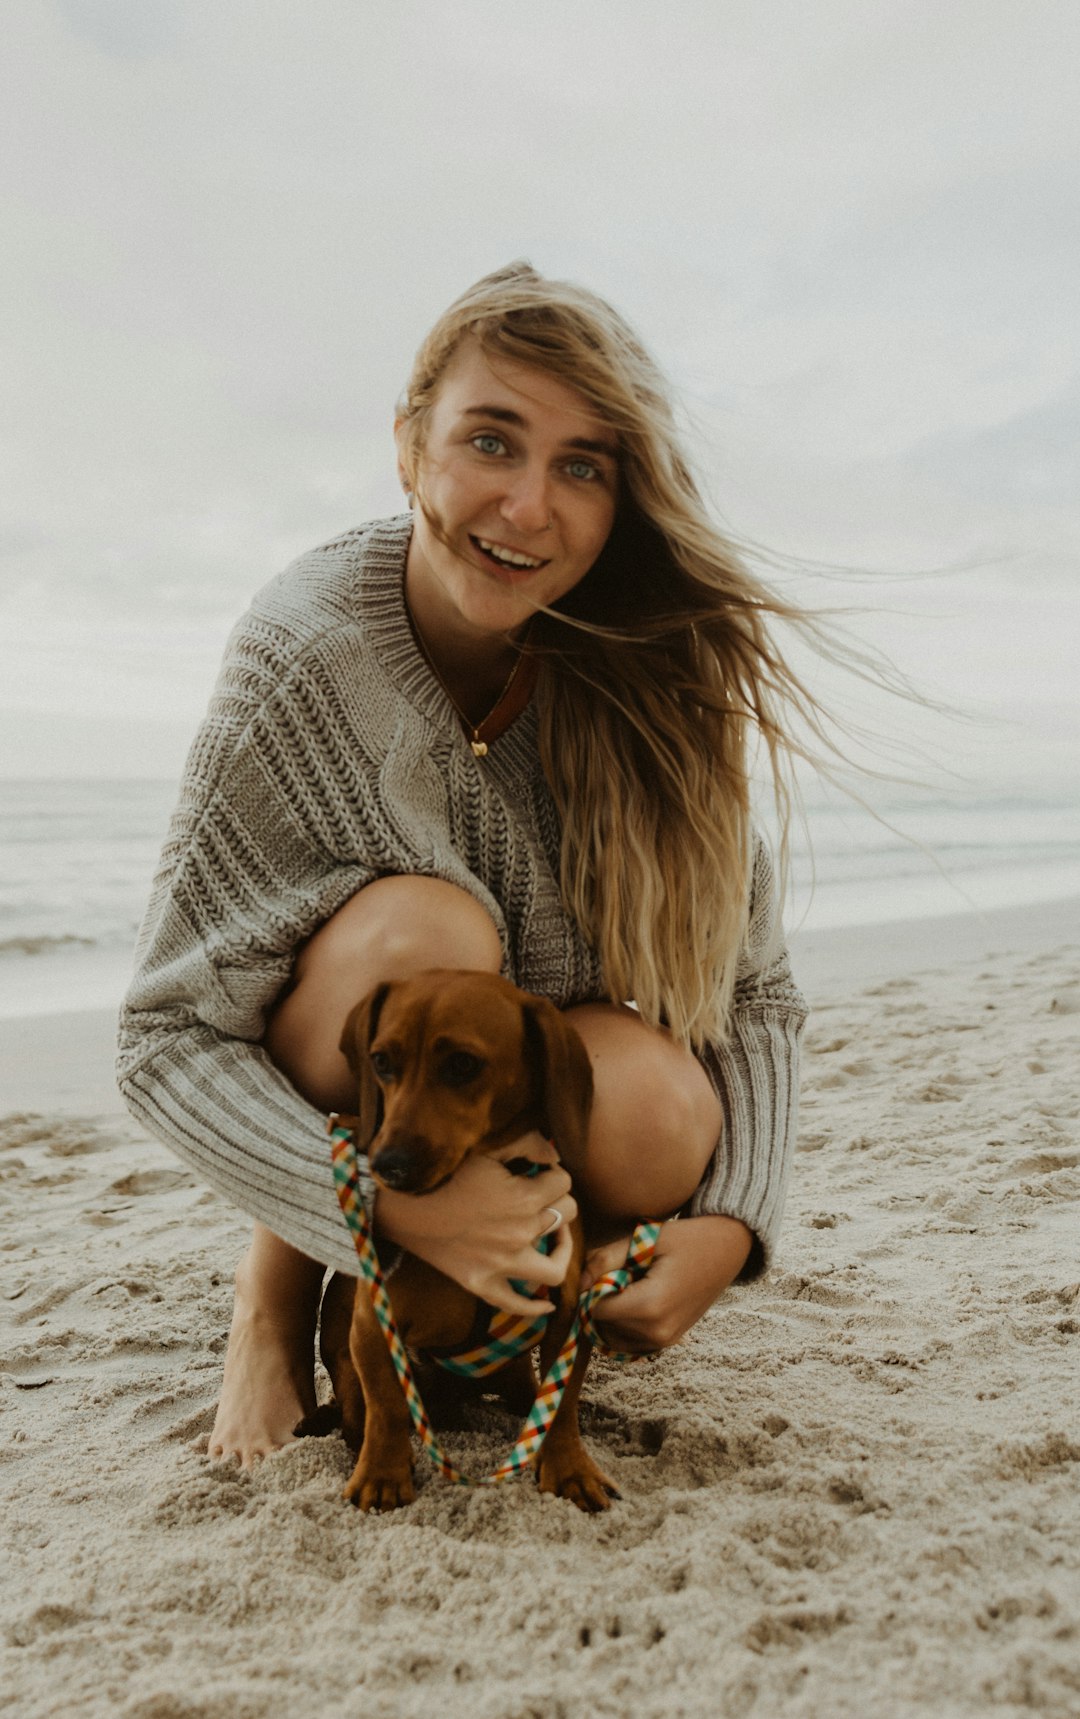 woman in gray knit sweater carrying brown short coated dog on beach during daytime